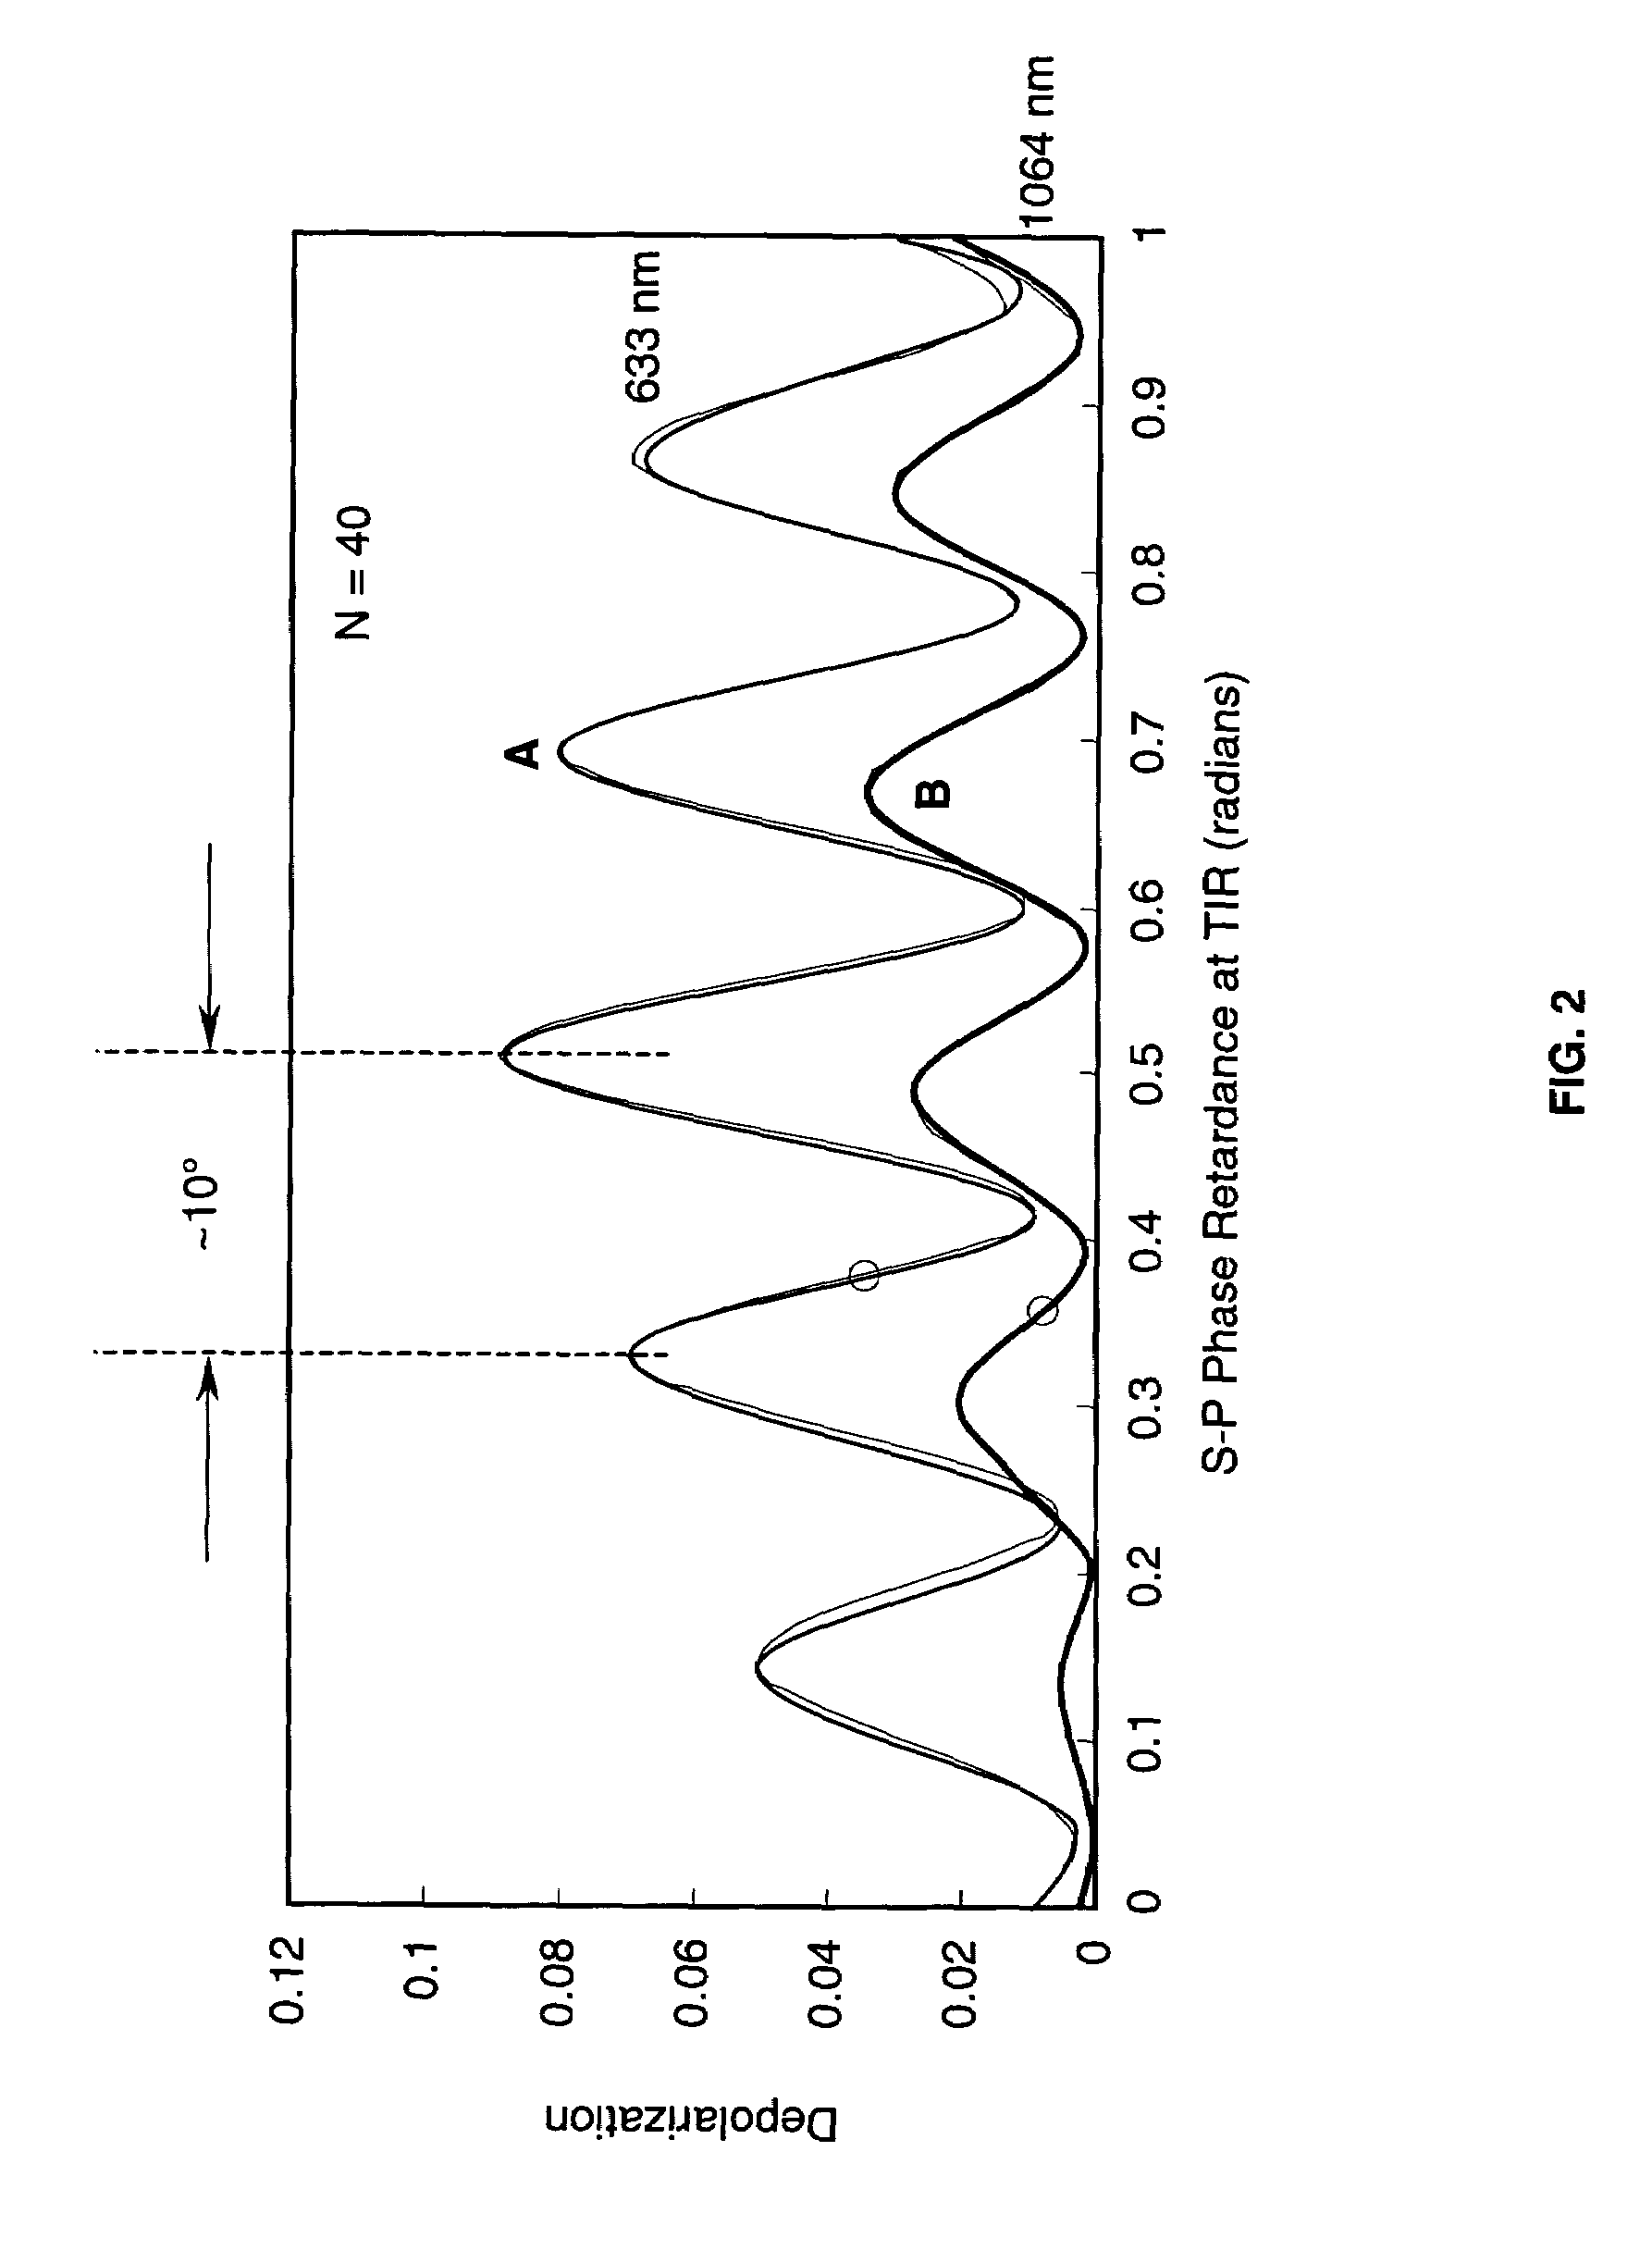 Zig-zag laser amplifier with polarization controlled reflectors